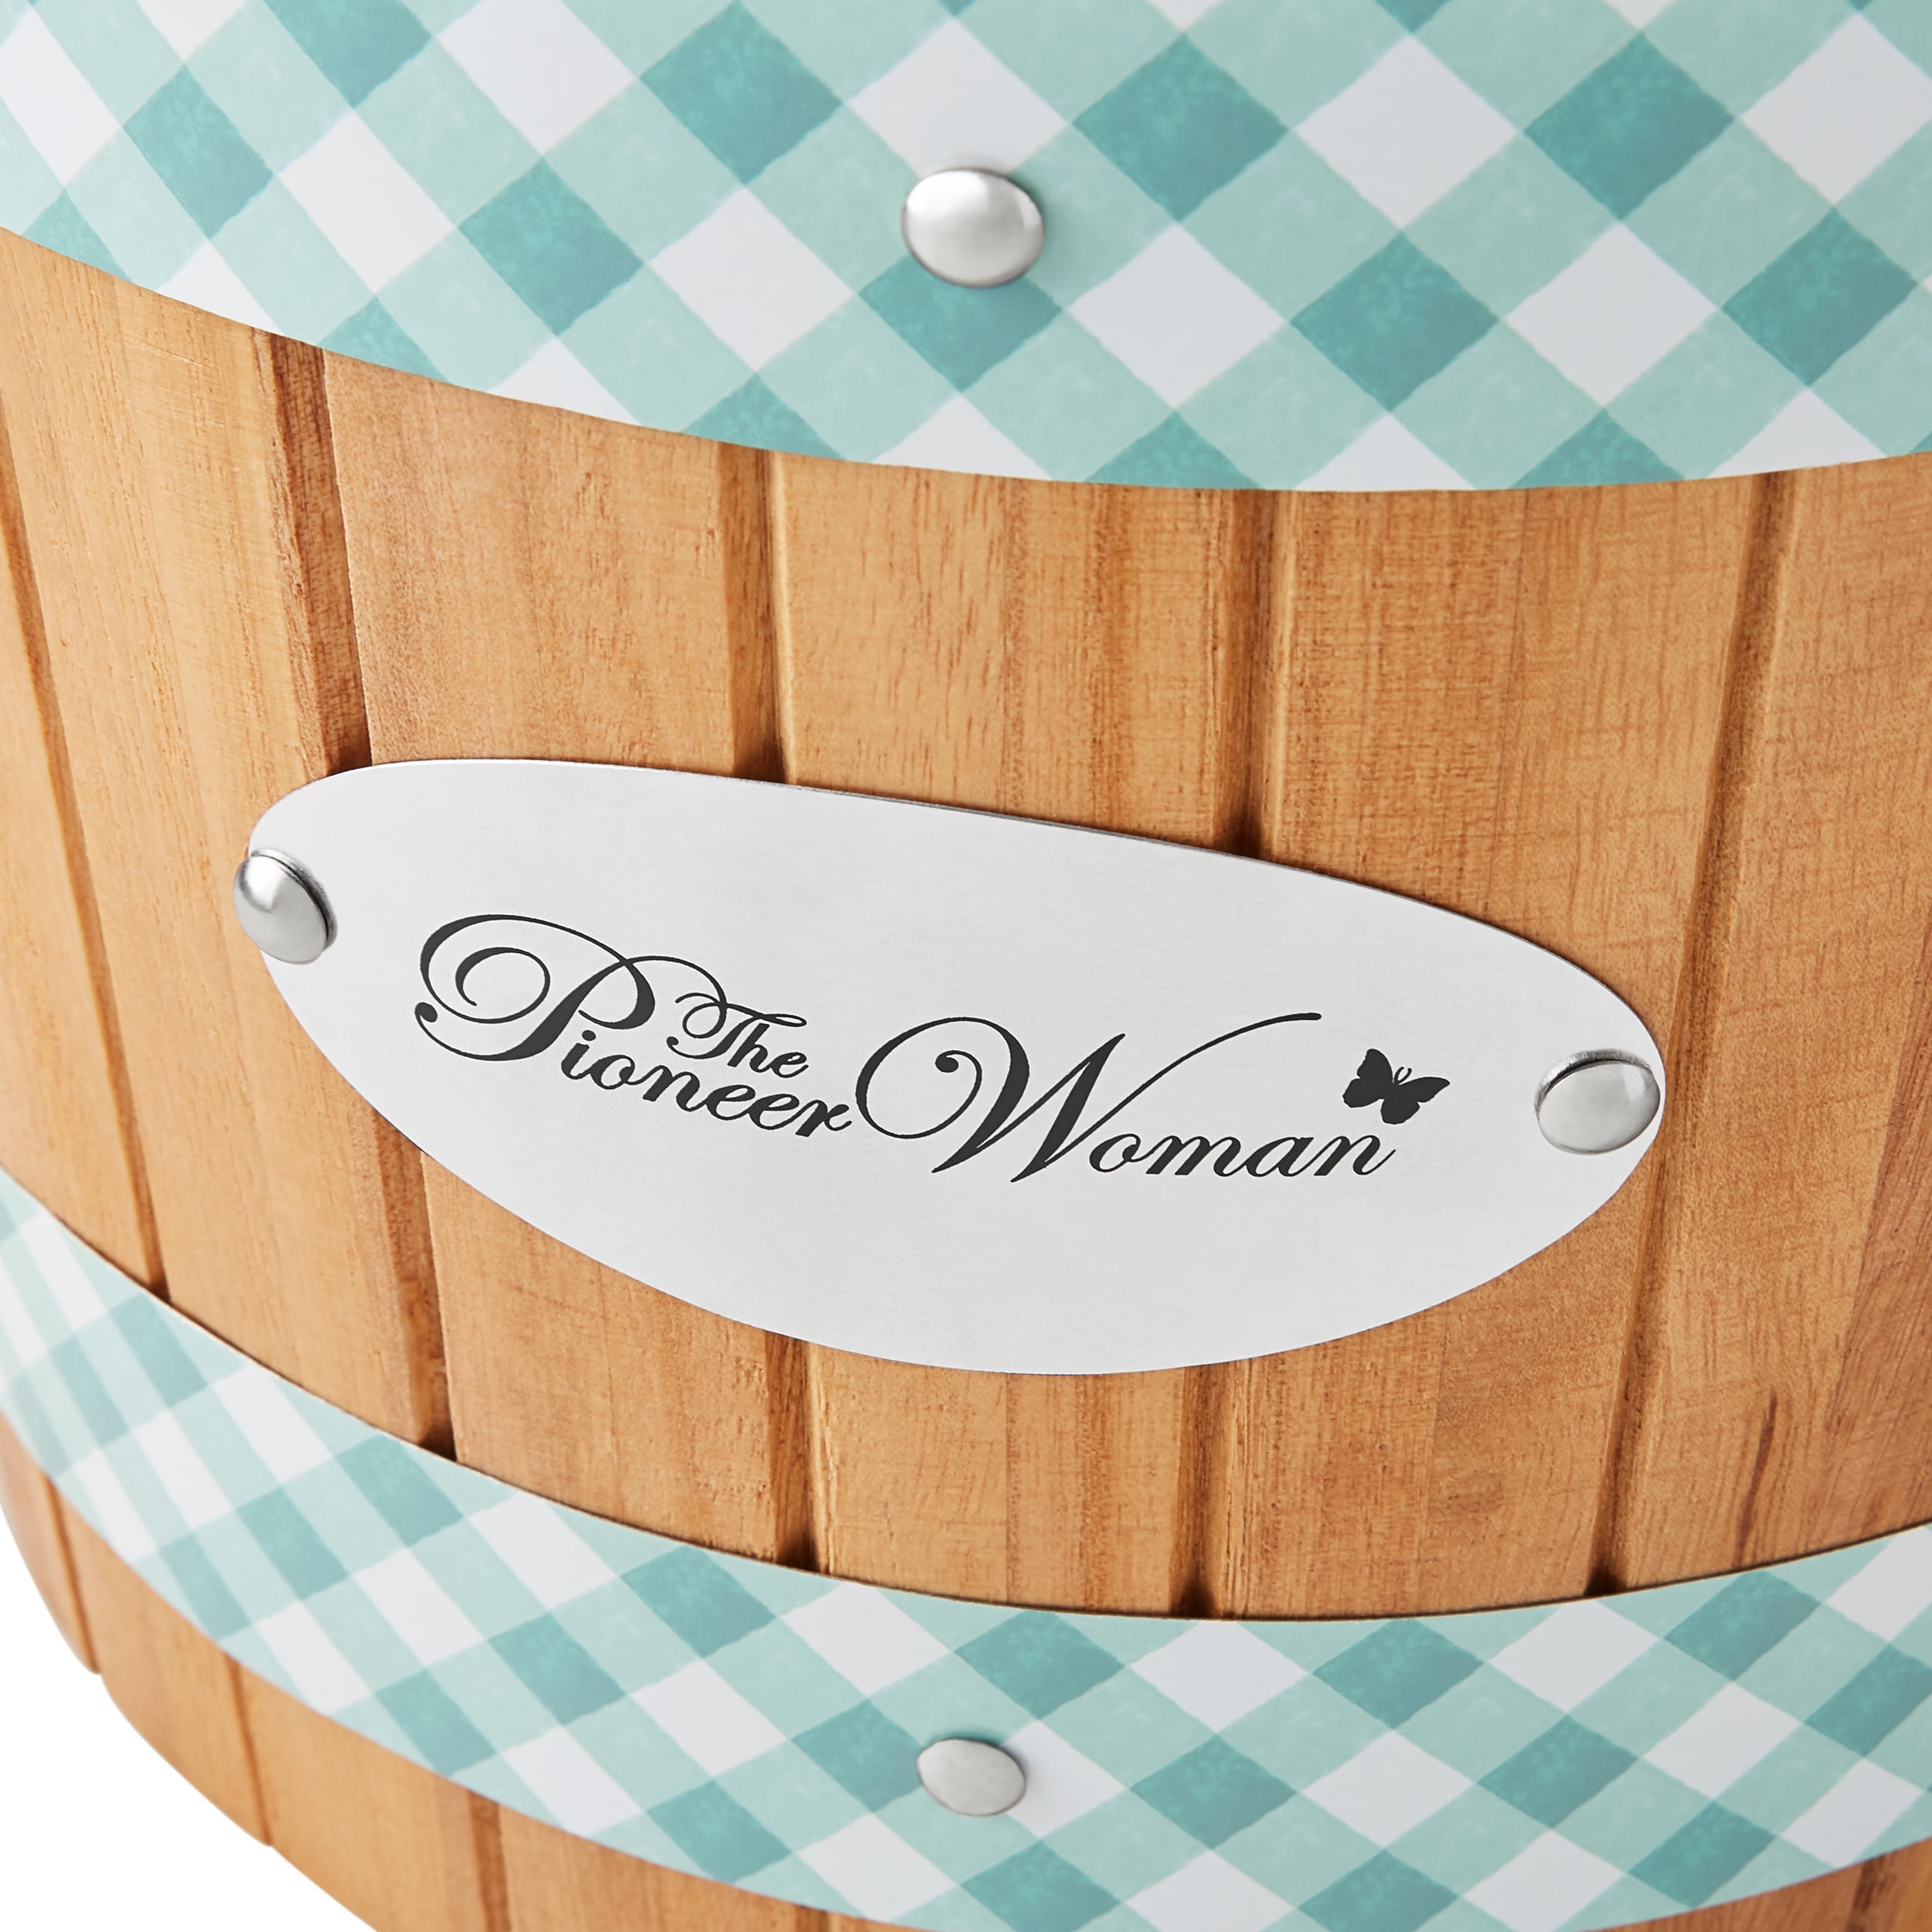 The Pioneer Woman's New Line Includes An Old-Fashioned Style Ice Cream Maker